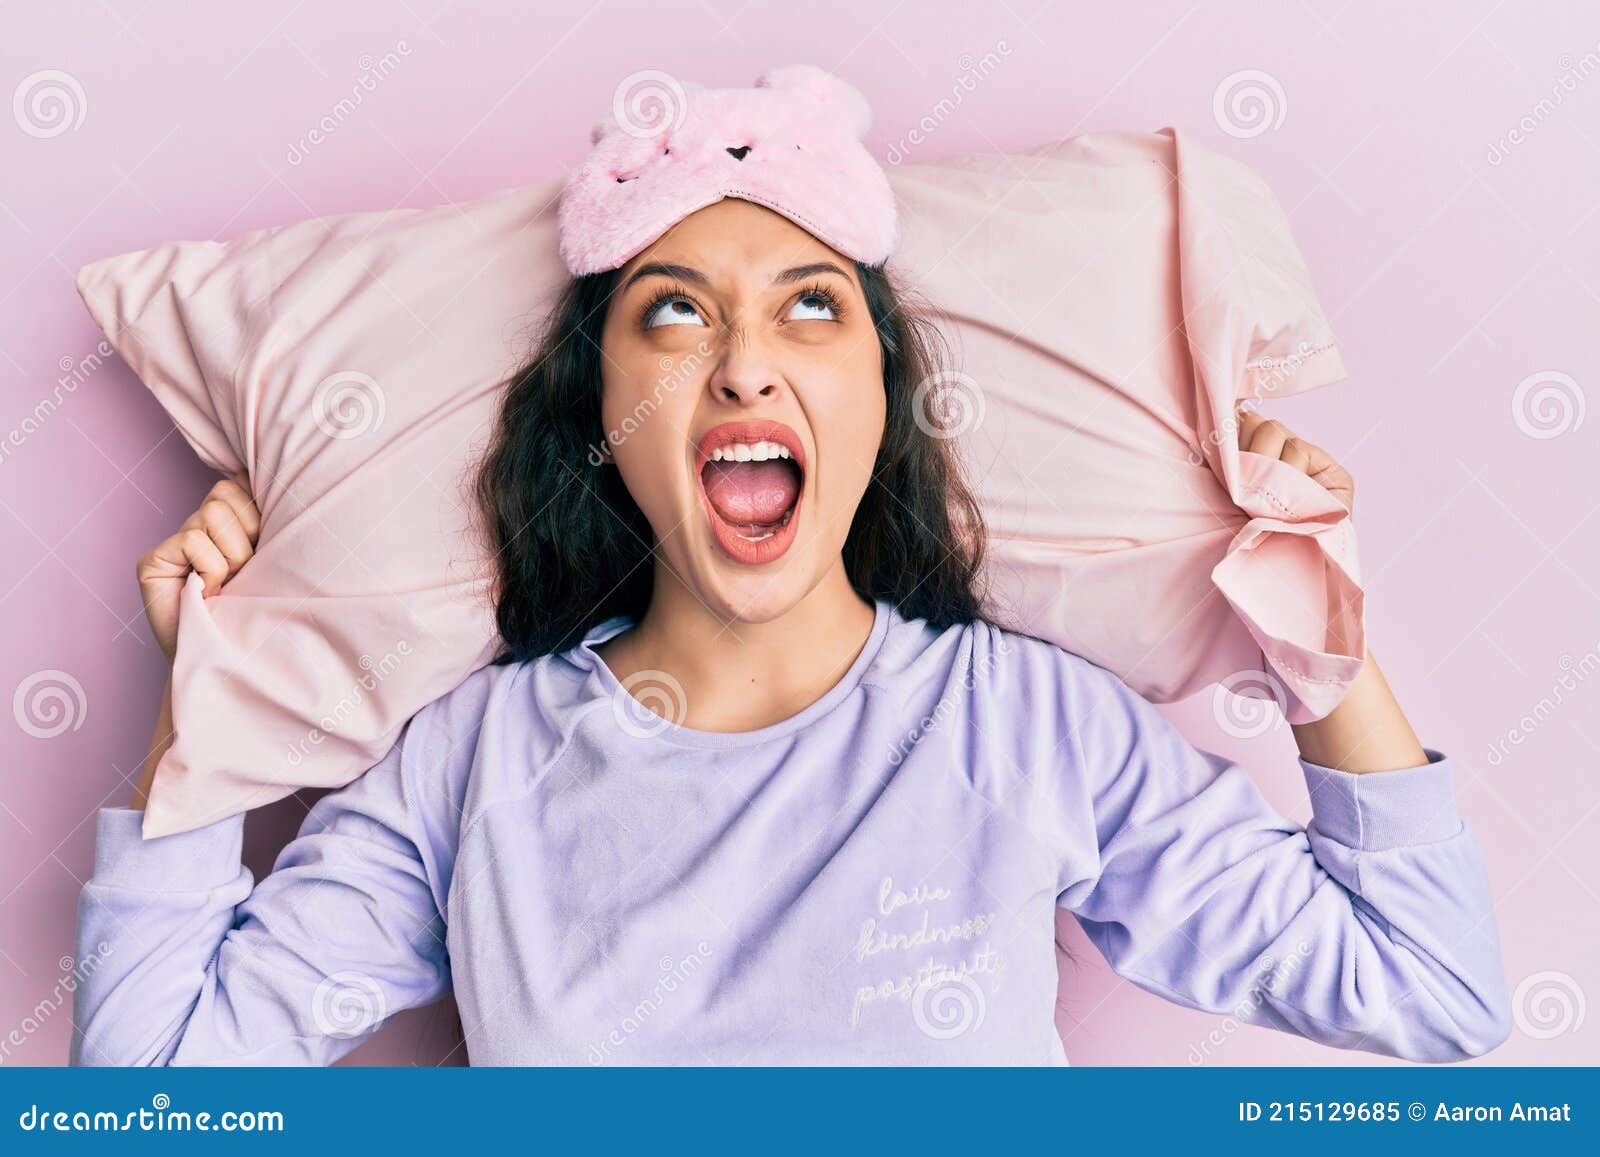 Beautiful Middle Eastern Woman Wearing Sleep Mask And Pajama Sleeping On Pillow Angry And Mad